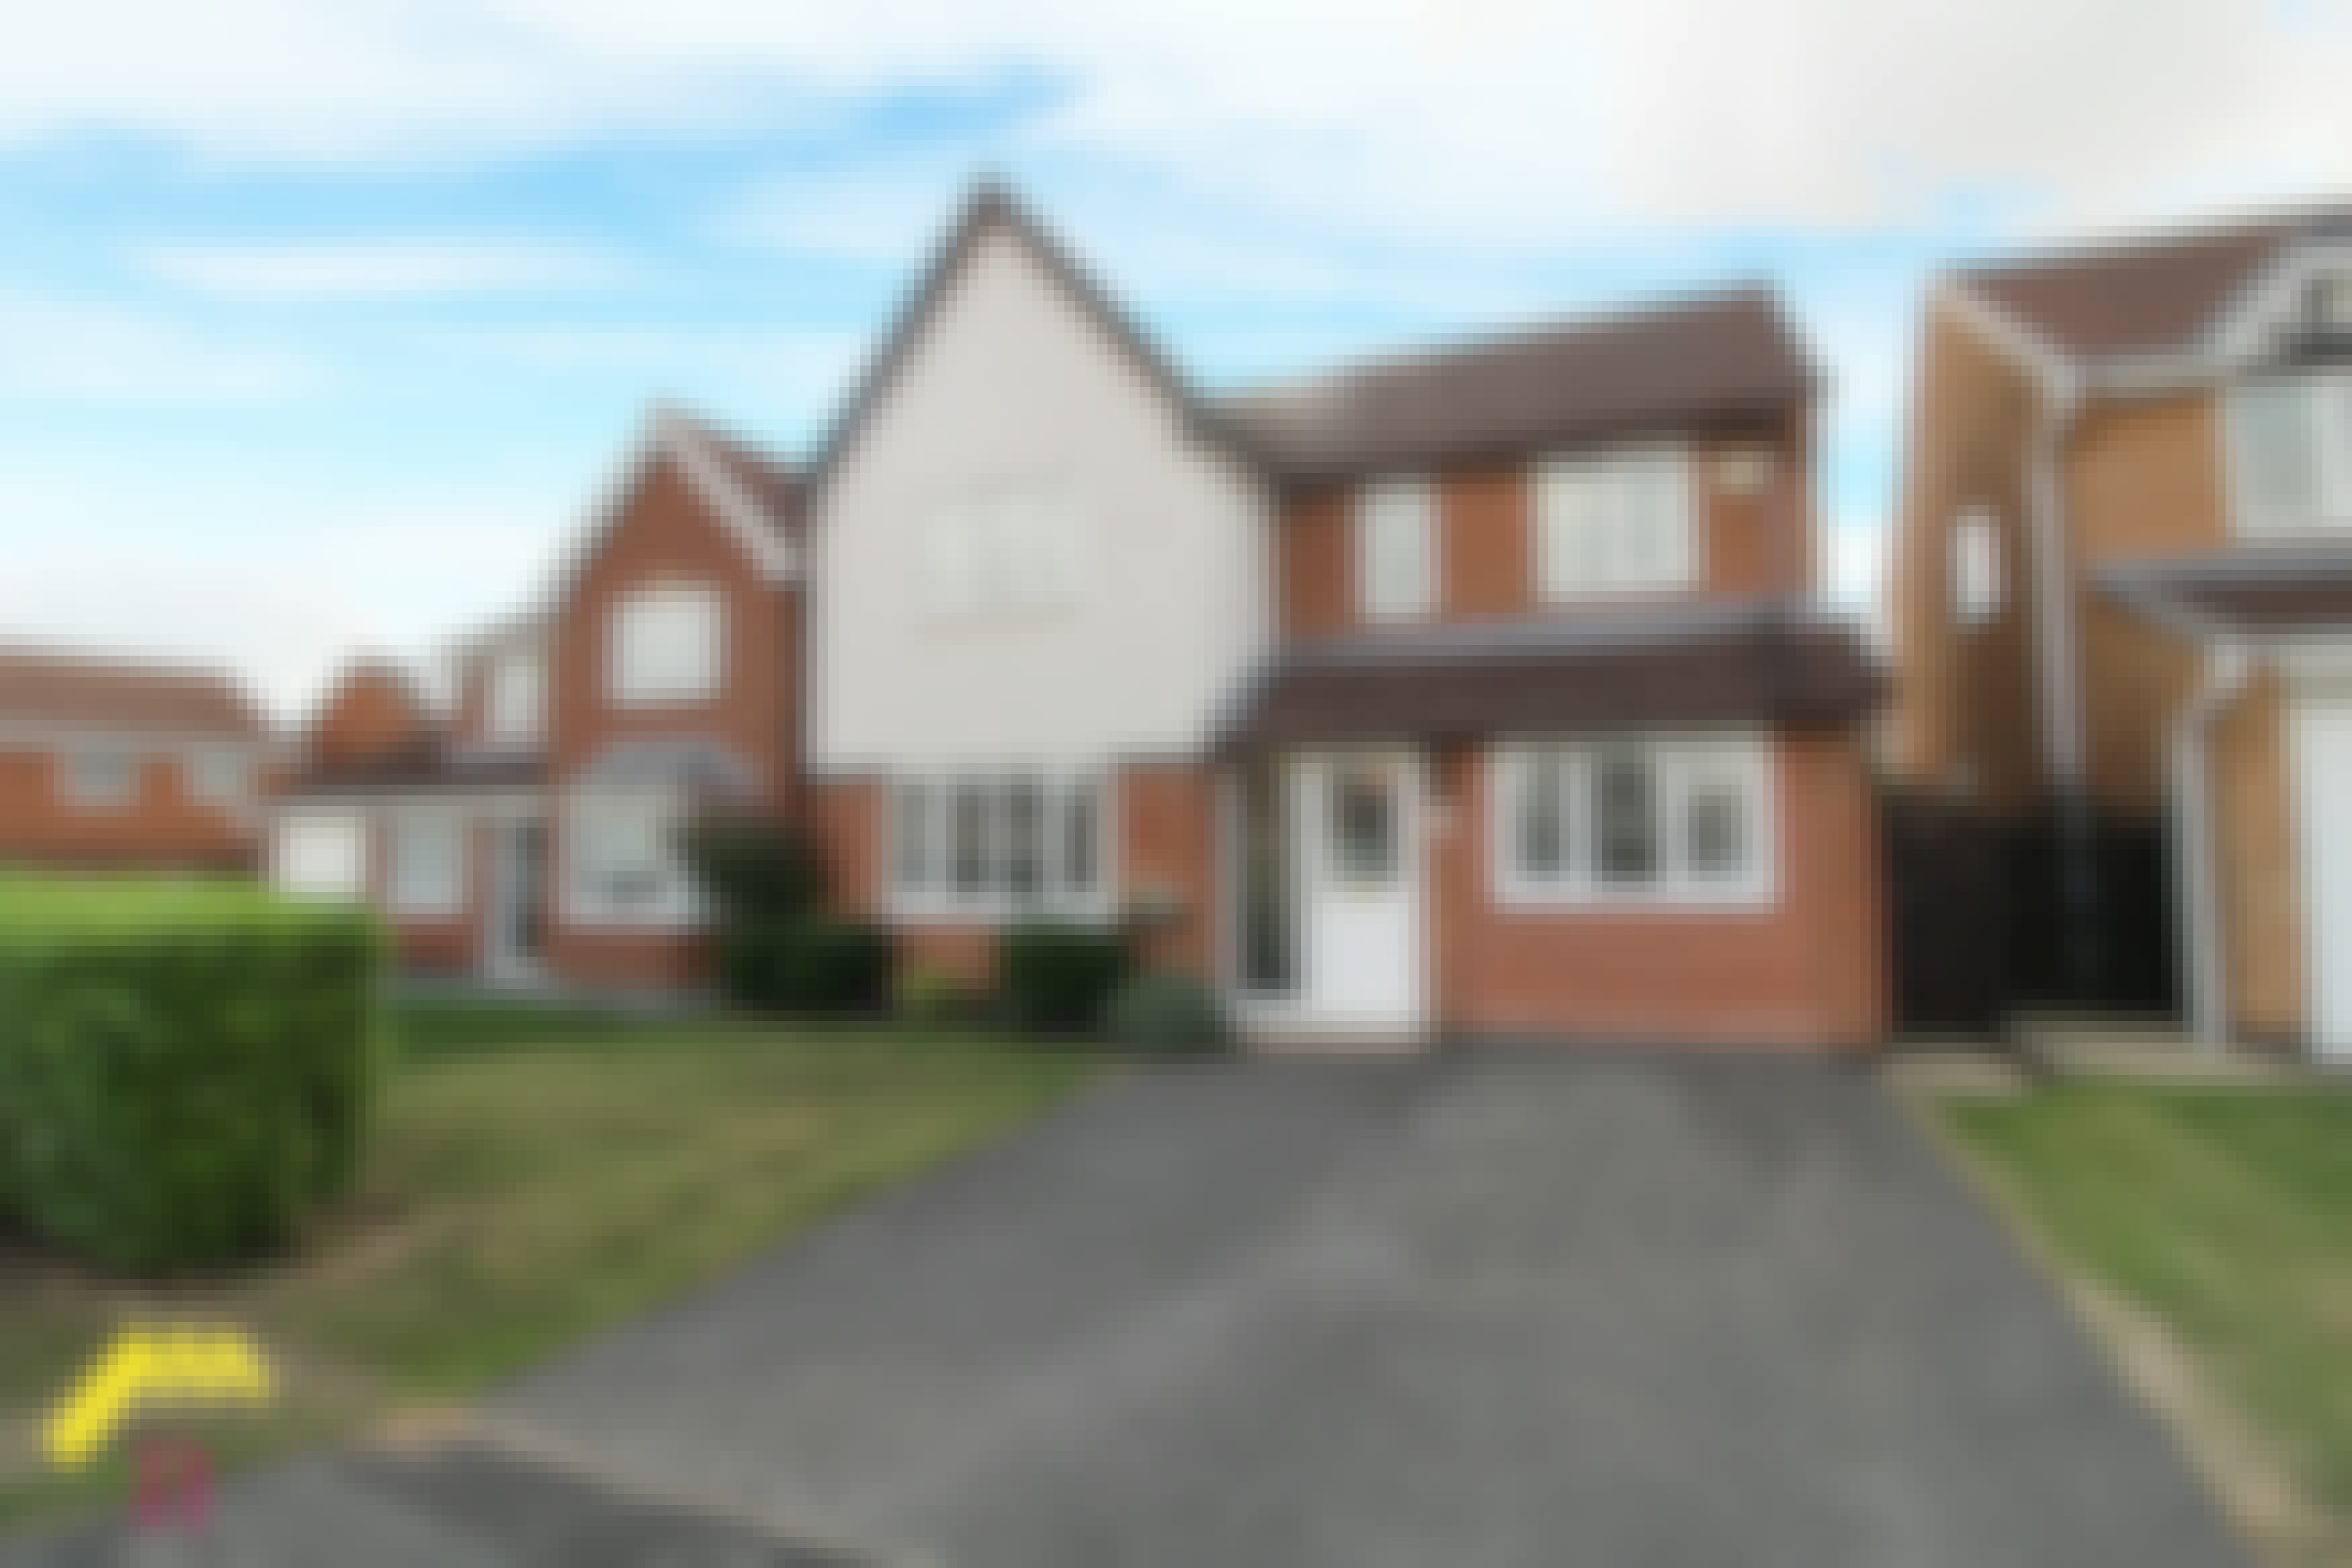 Overview image #1 for Kestrel Drive, Adwick le Street, Doncaster, DN6